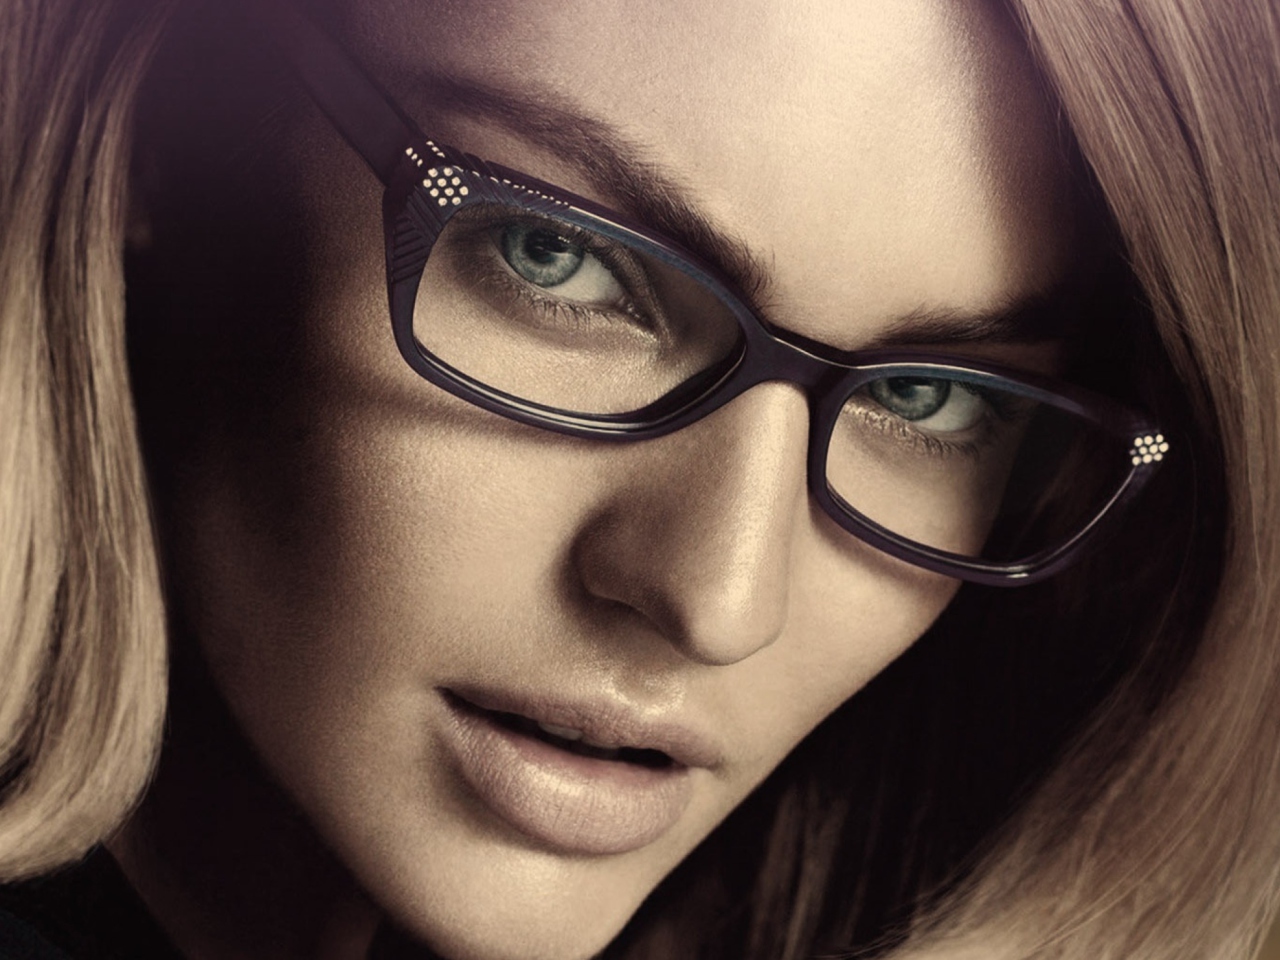 Candice Swanepoel In Glasses wallpaper 1280x960